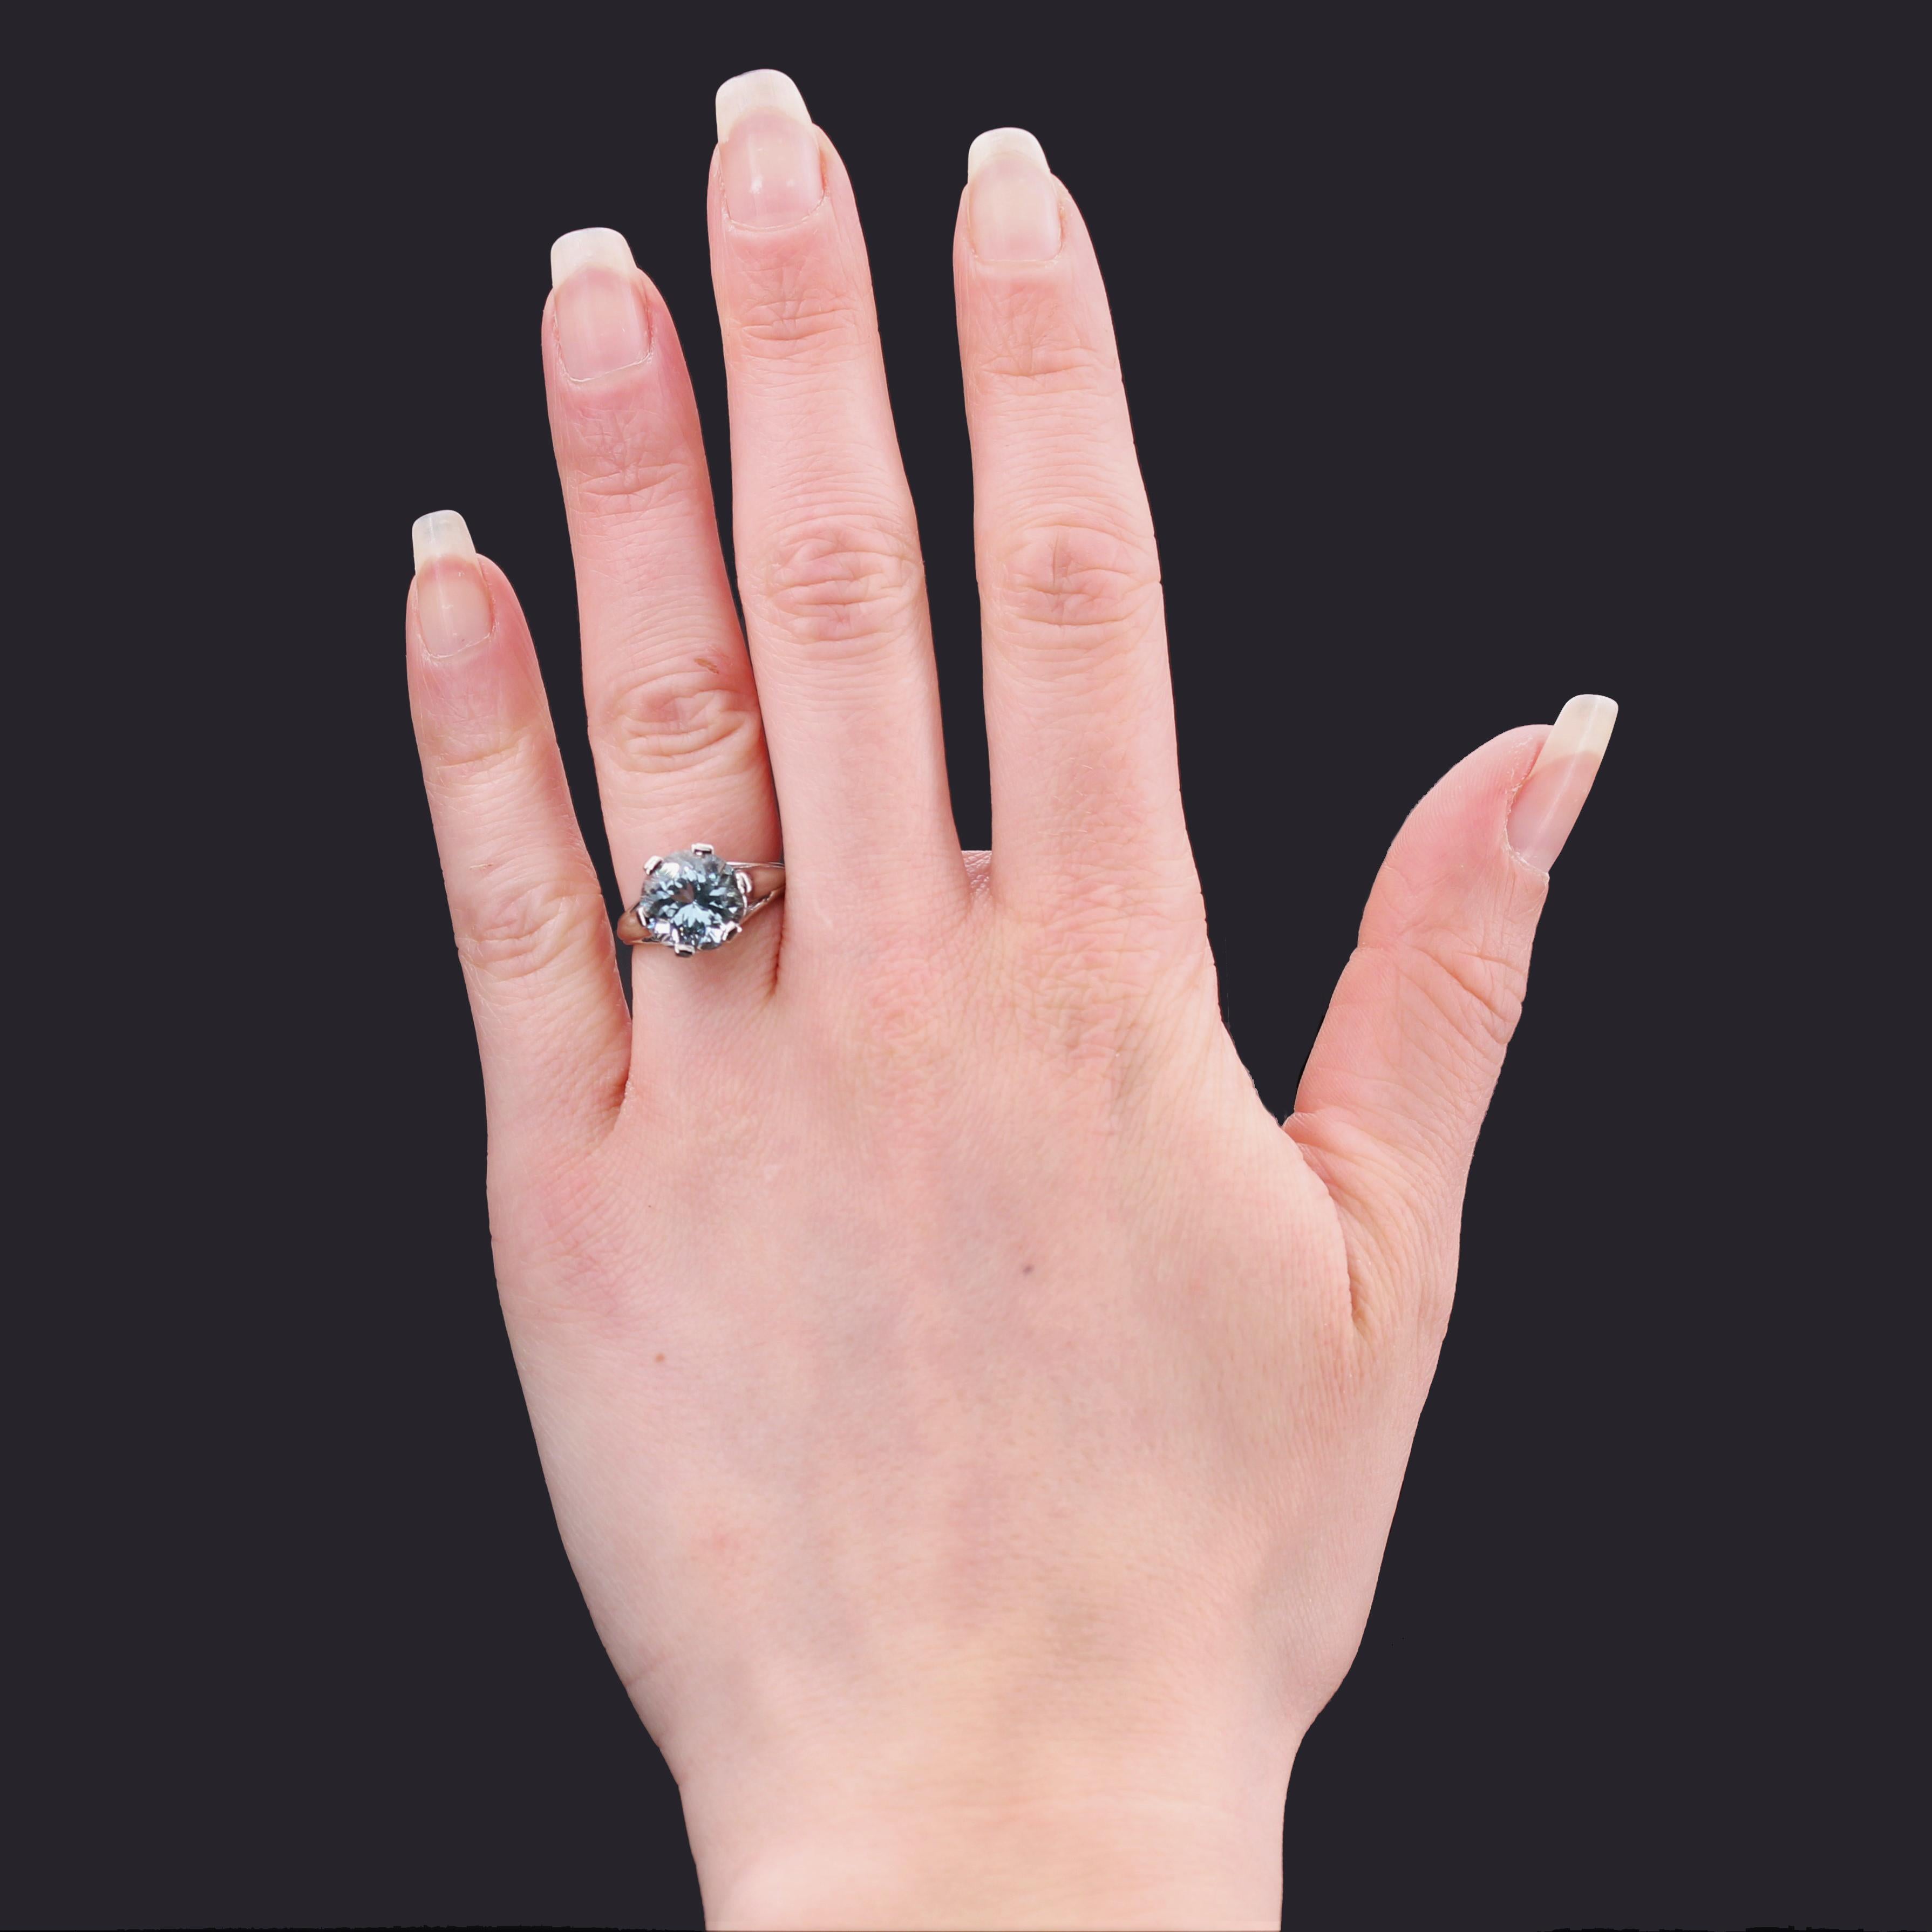 Ring in 18 karat white gold, eagle head hallmark.
The mounting of this antique solitaire ring is formed of 2 rings and the departure dressed with a gold palm. It supports an openwork basket holding a round aquamarine with flat claws.
Total weight of